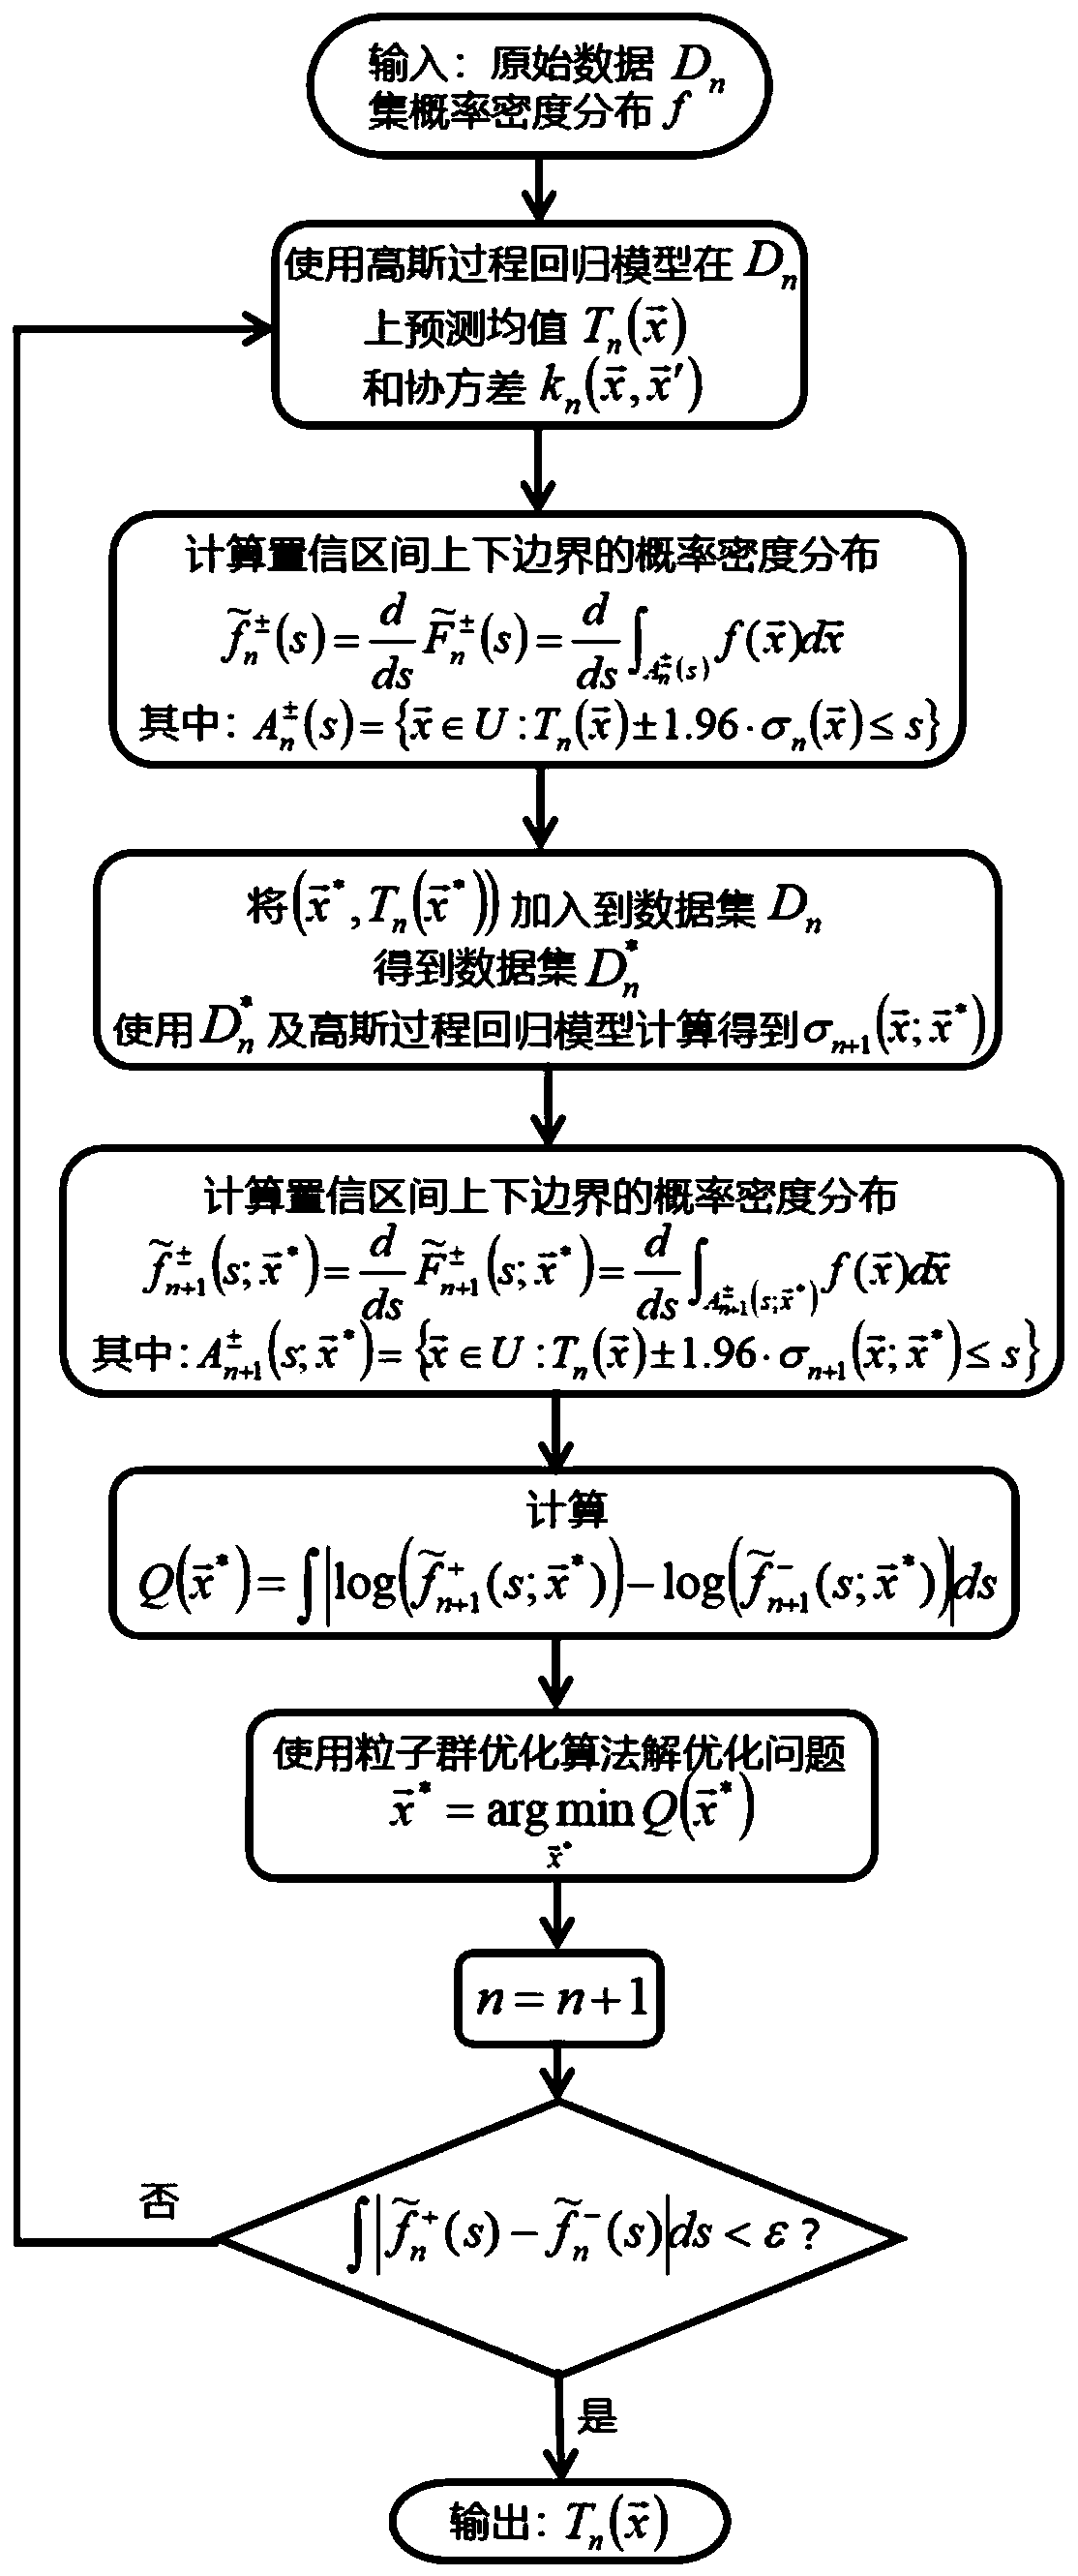 Multi-working-condition power system performance prediction method and system based on Gaussian process regression